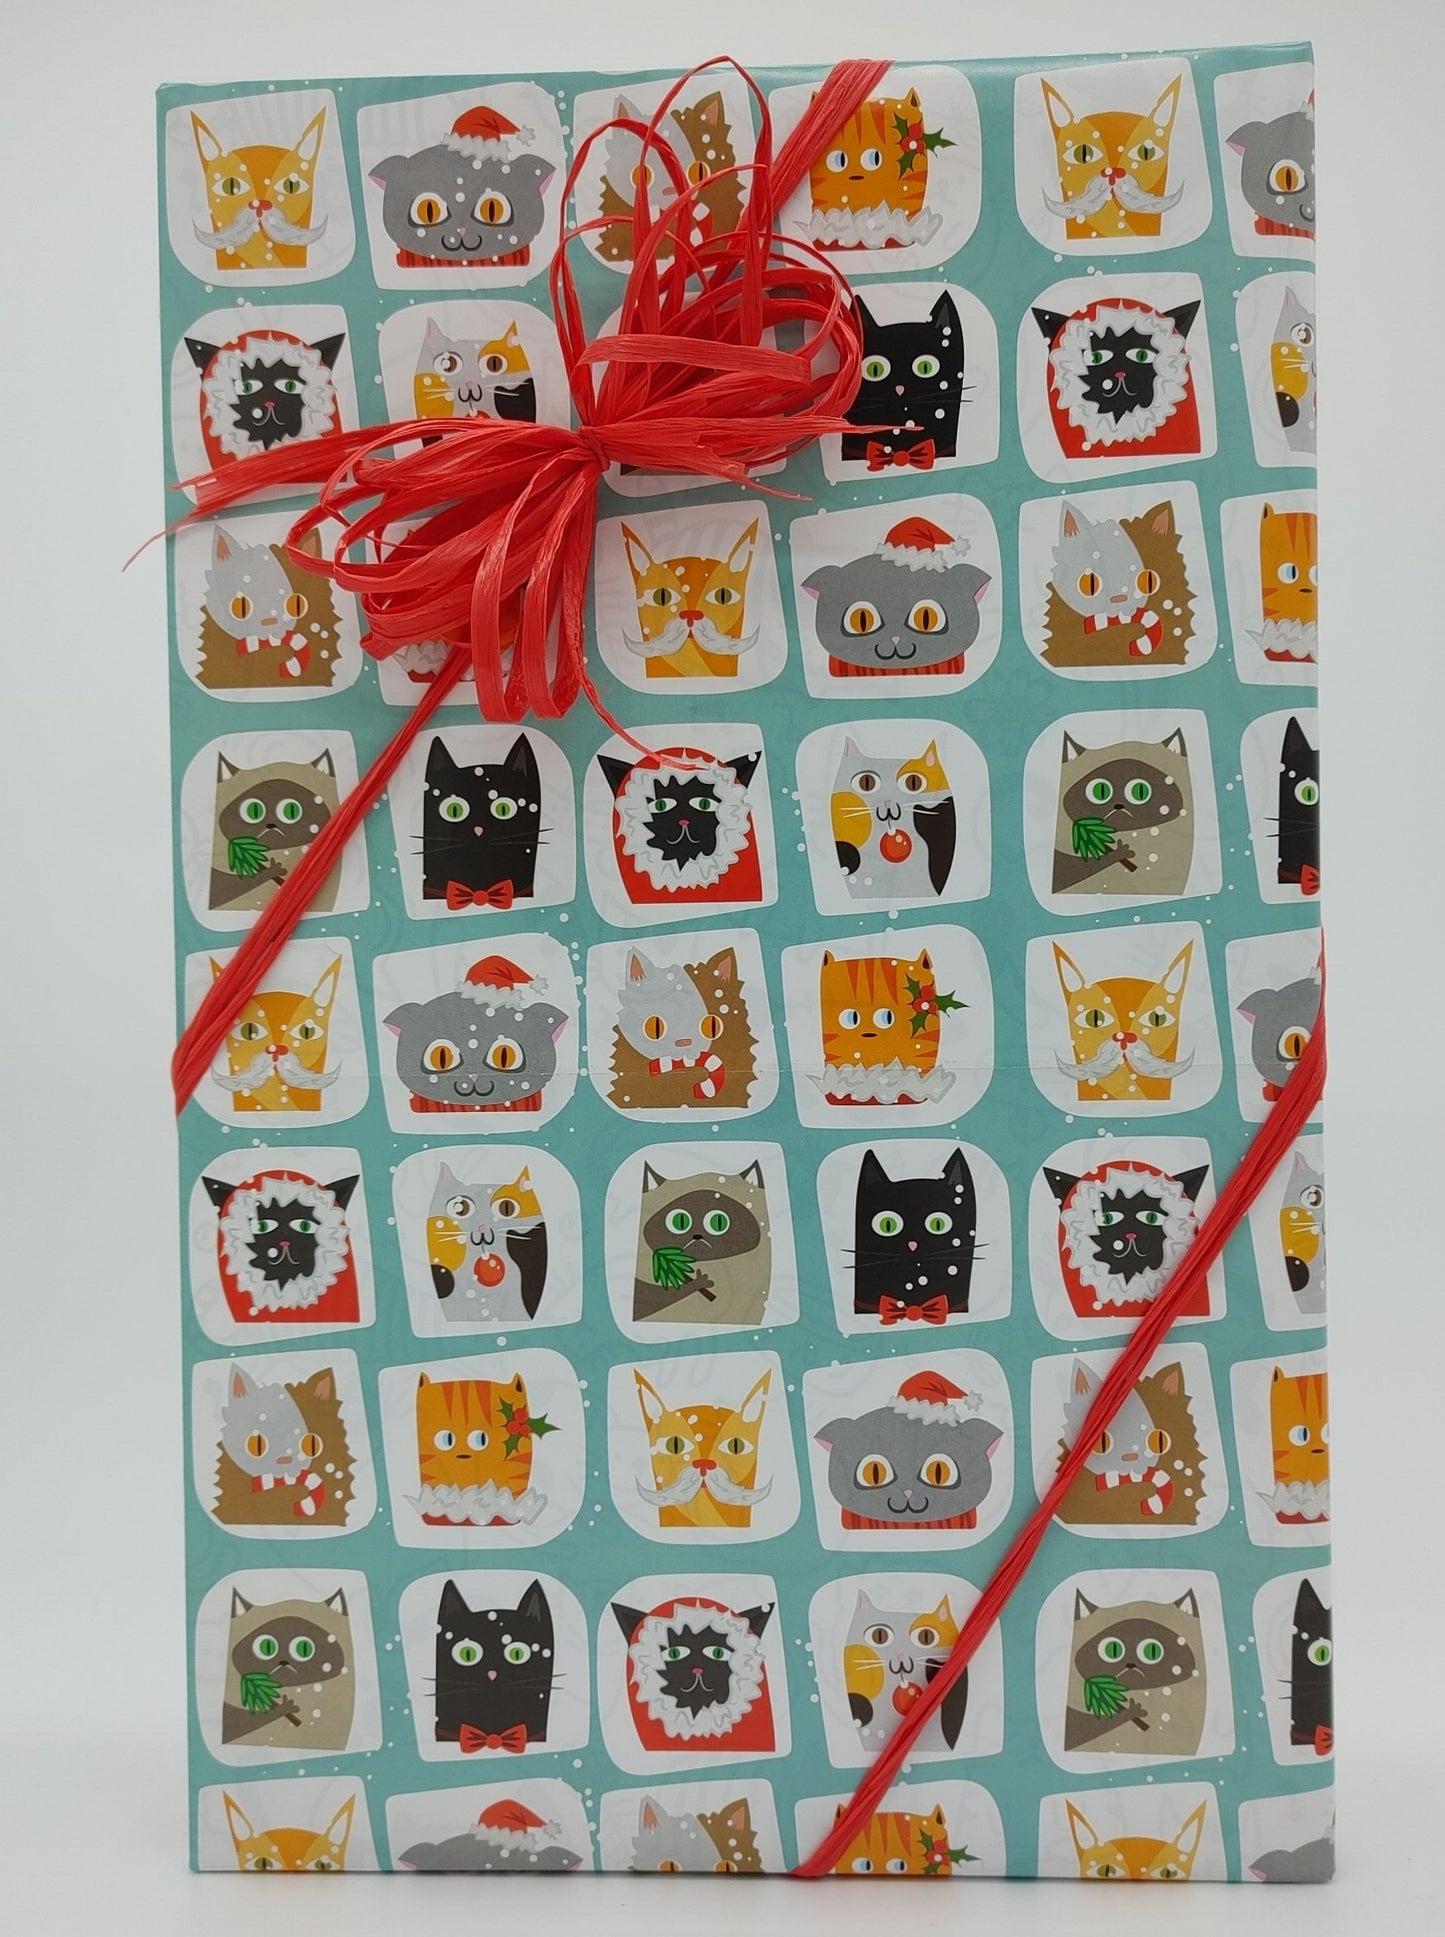 Cats and Kittens Wrapping Paper Reversible with a Holiday Design and an All Occasion Design